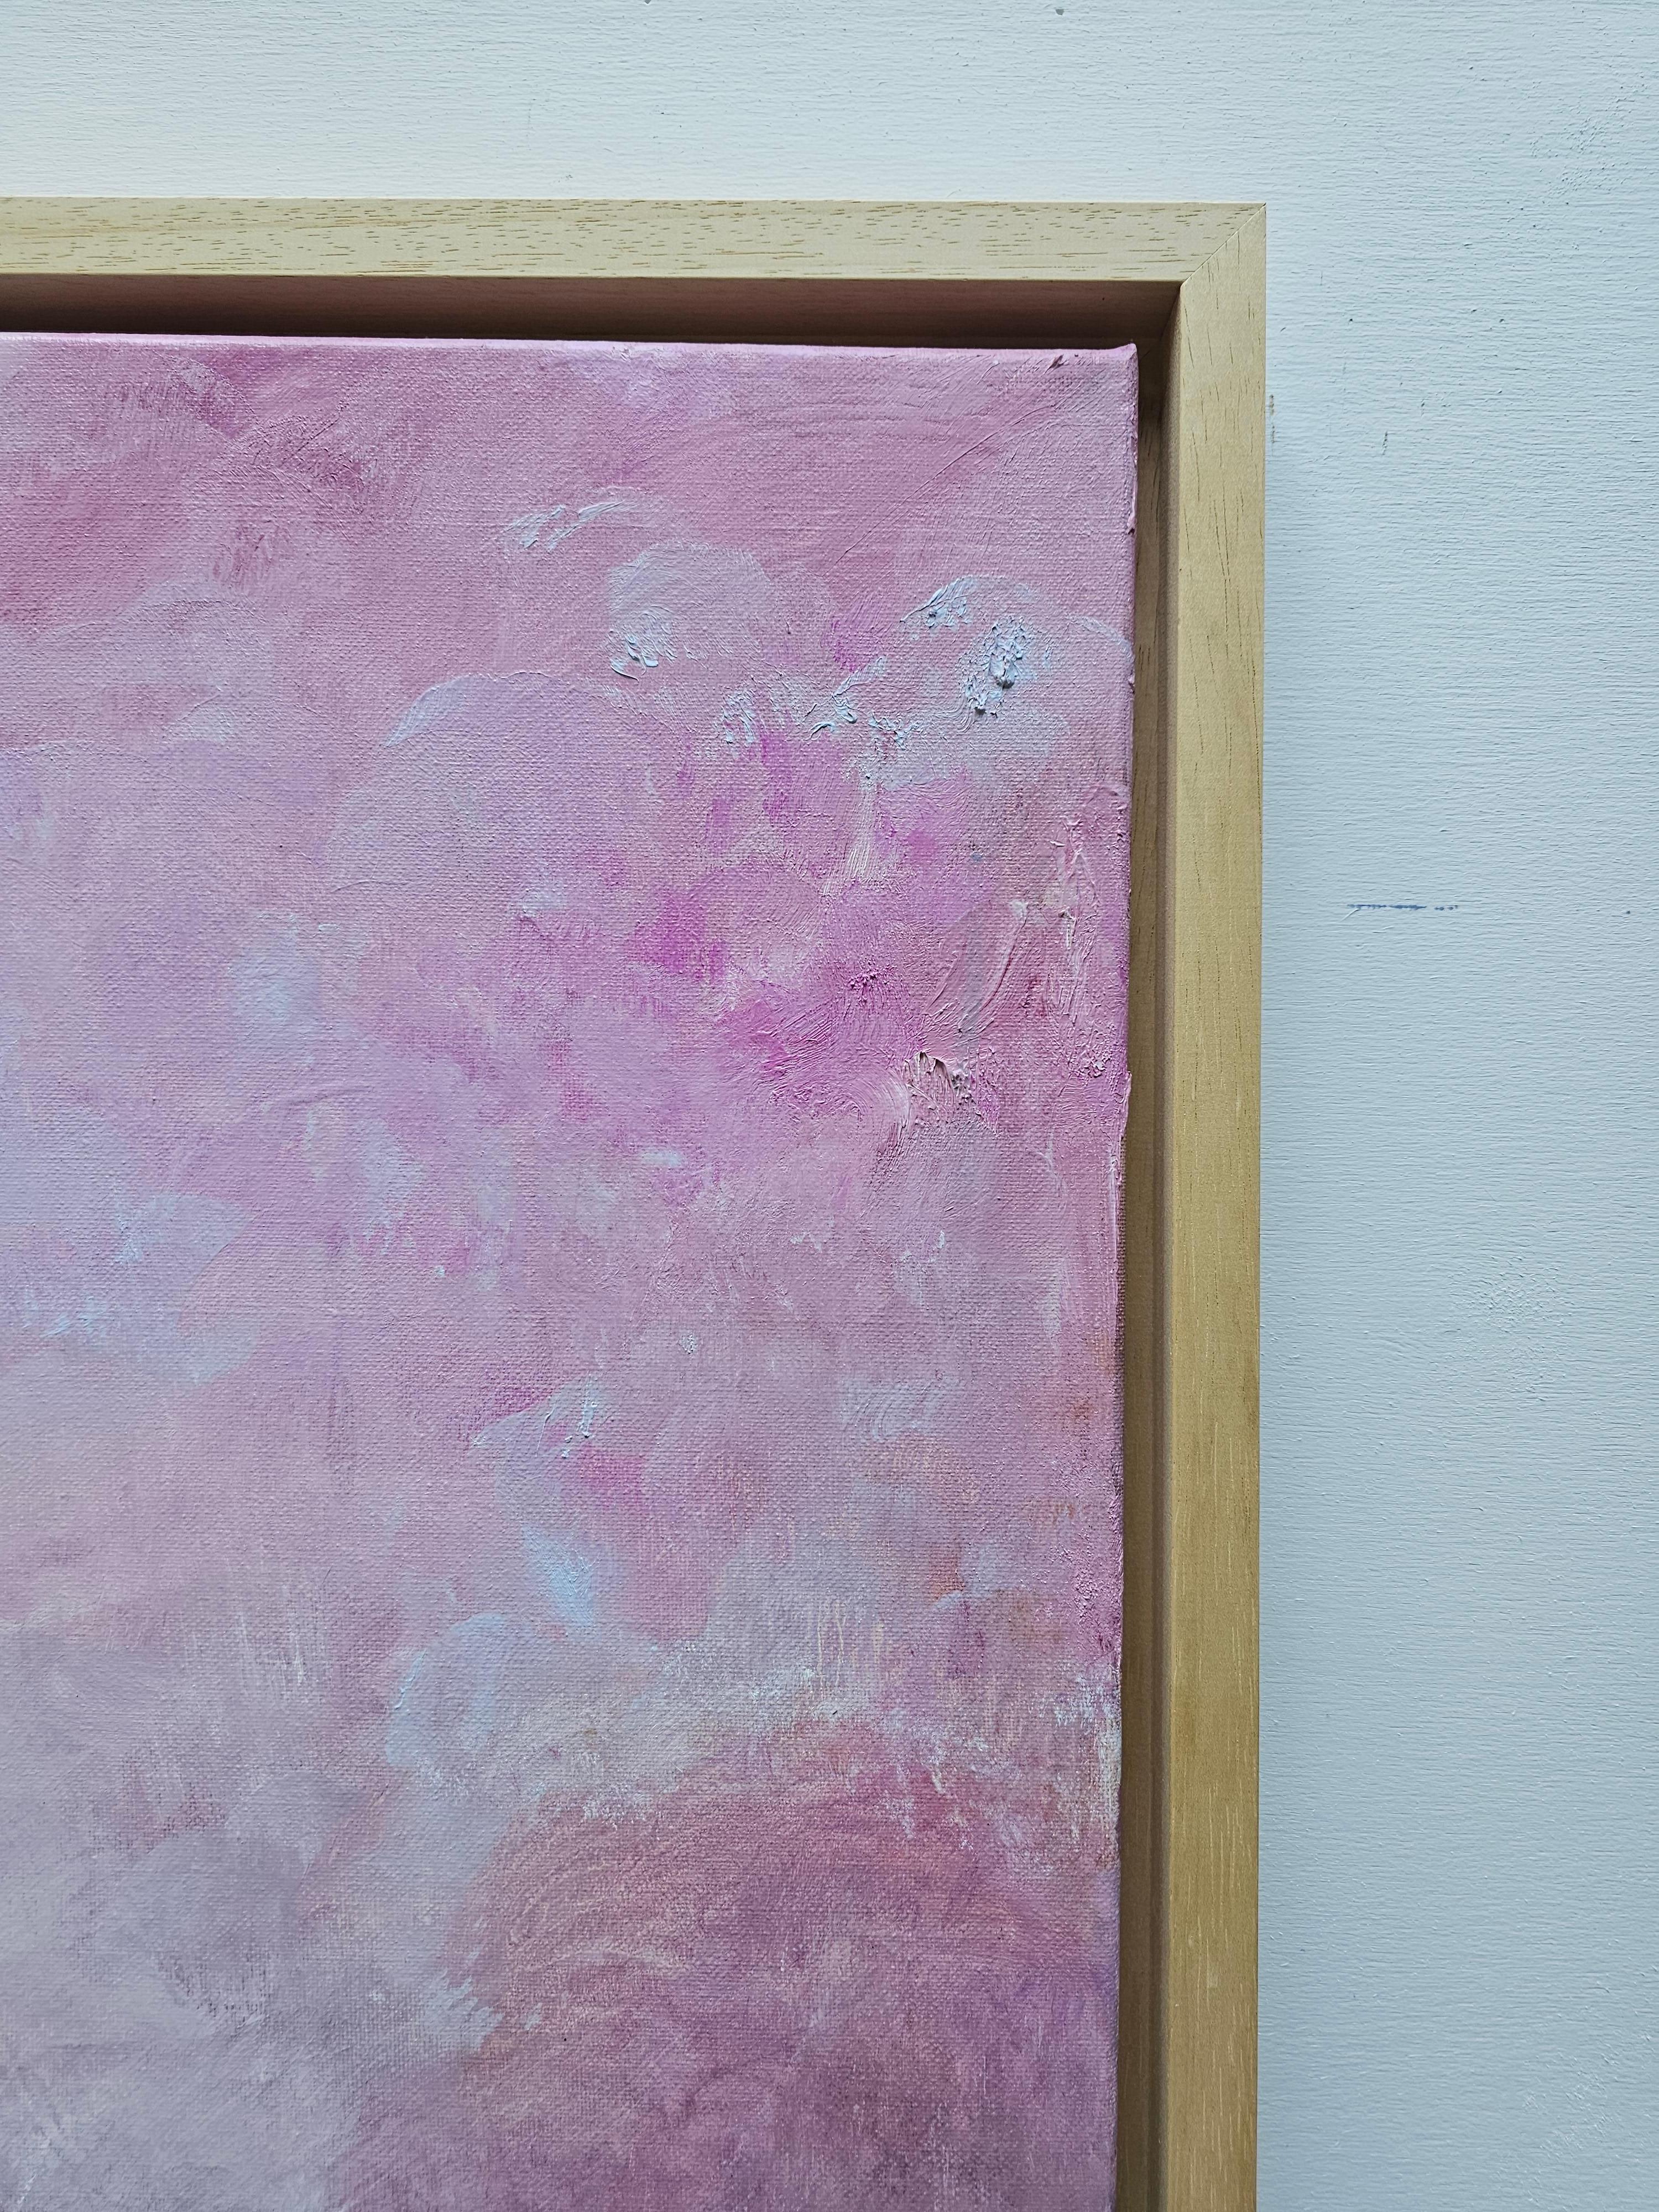 Venus sunrise - soft pink and gold abstract sky painting - Abstract Painting by Jennifer L. Baker